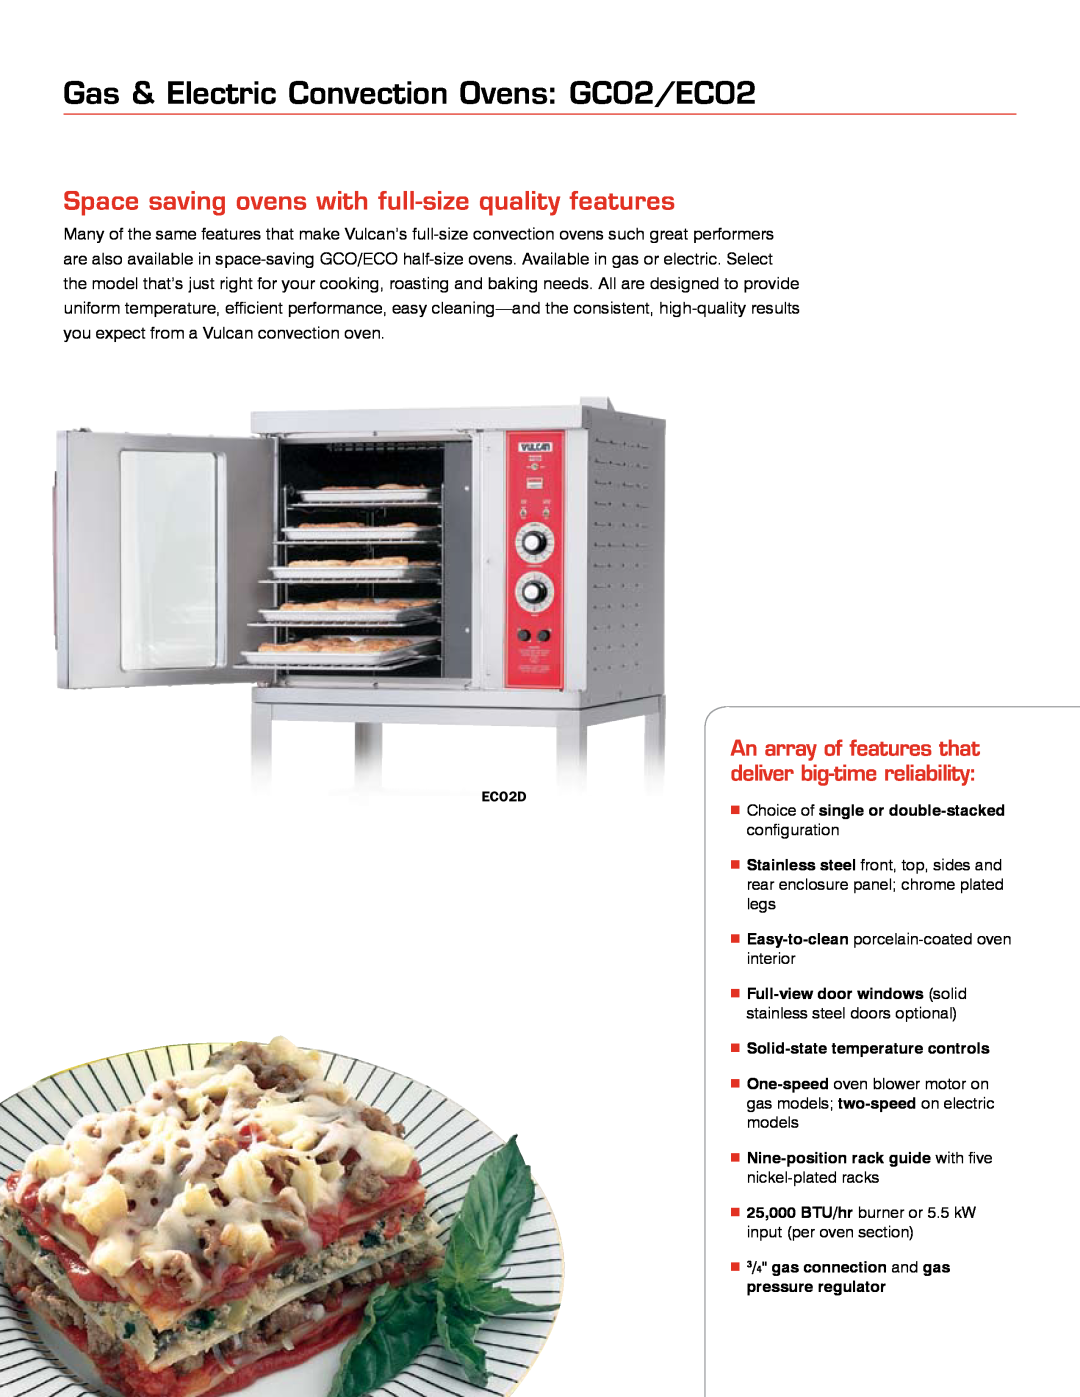 Vulcan-Hart VC6G manual Gas & Electric Convection Ovens GC02/EC02, Space saving ovens with full-size quality features 